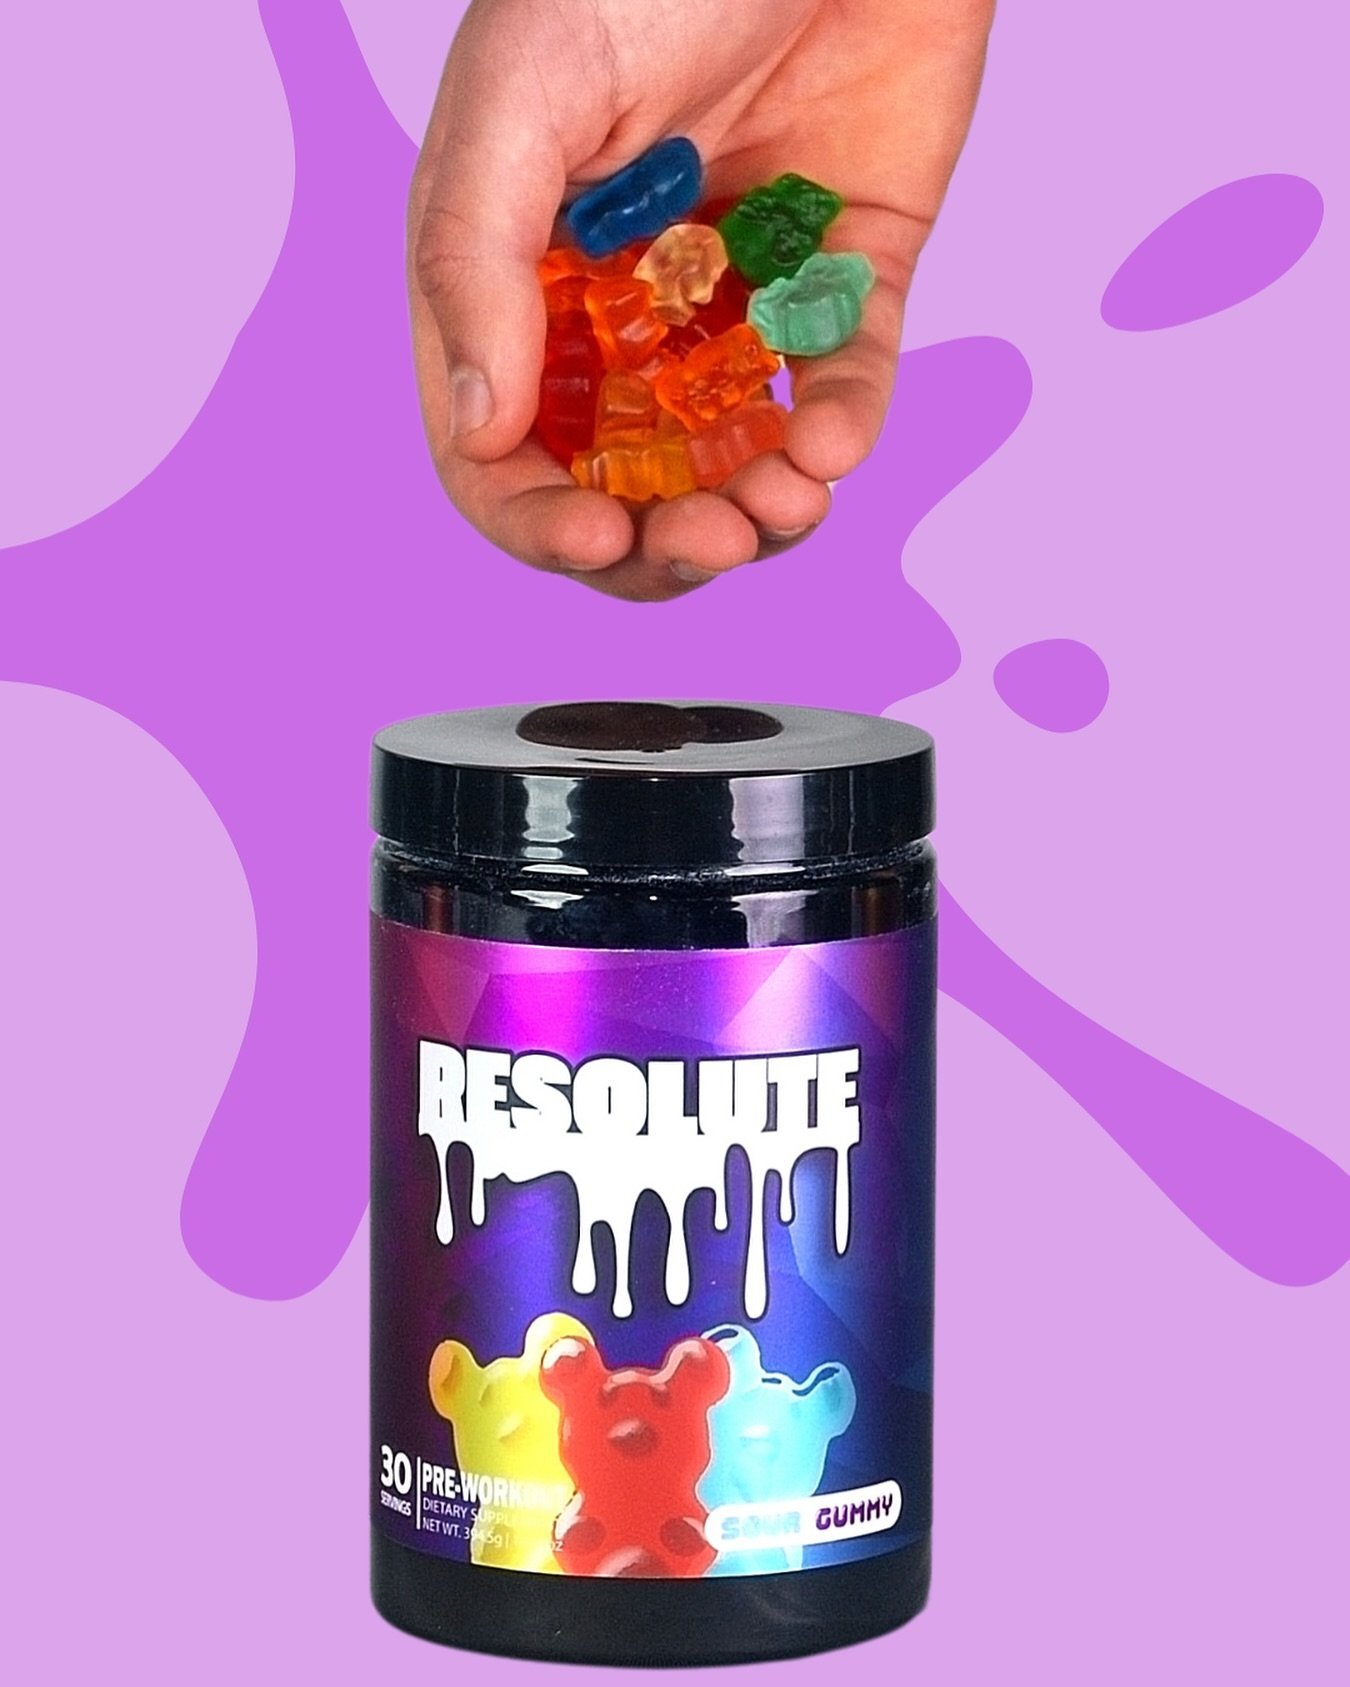 Introducing Sour Gummy 🍬✨

Bursting with tangy sweetness, each serving delivers a combination of energy-boosting ingredients to fuel your performance and enhance focus, helping you push past your limits. Say goodbye to workout fatigue and hello to e